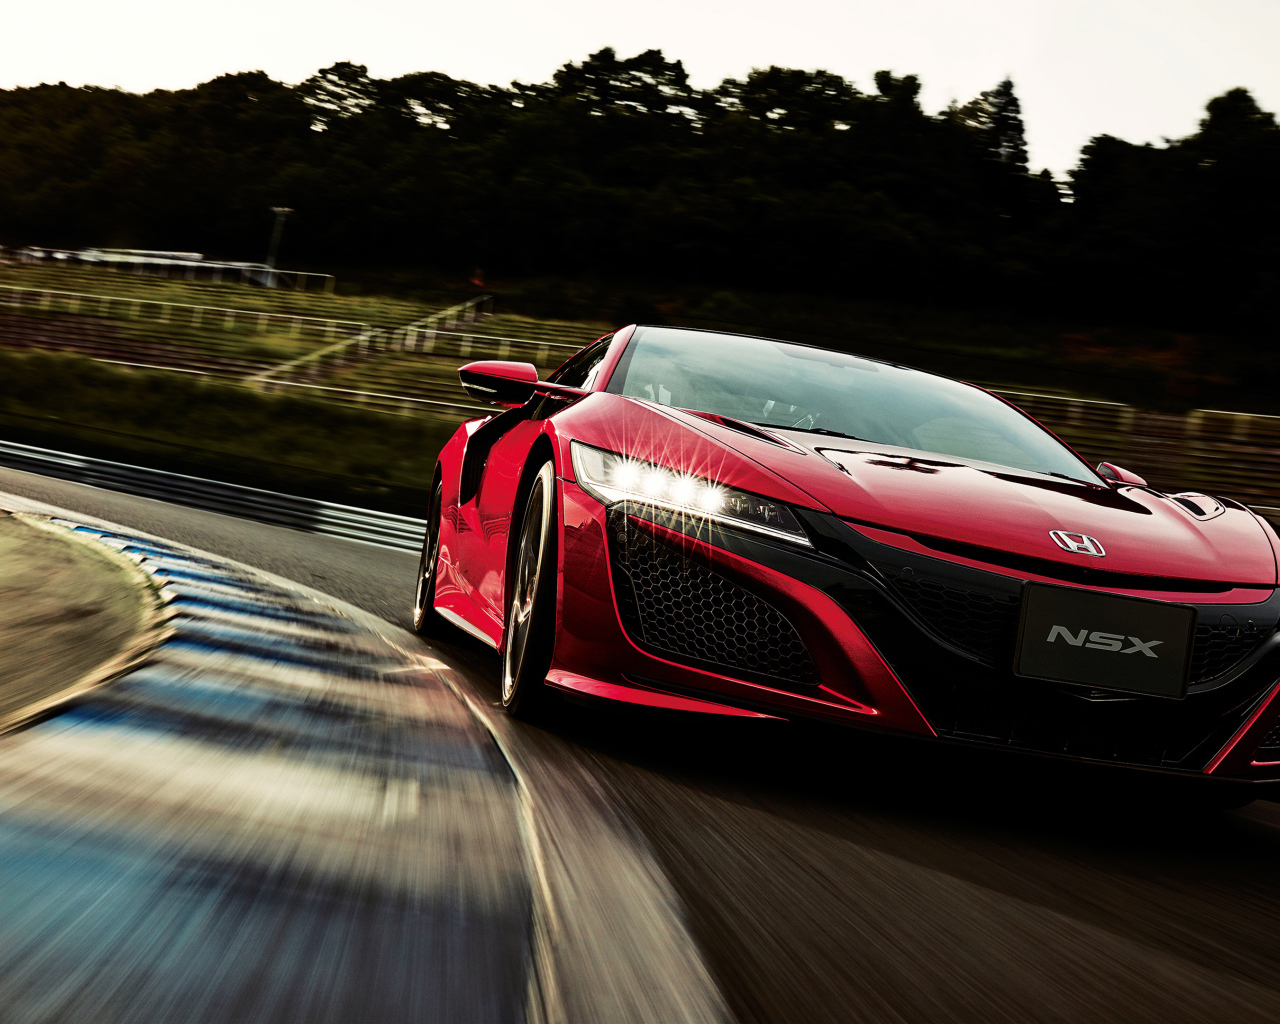 Red Honda NSX car on the track